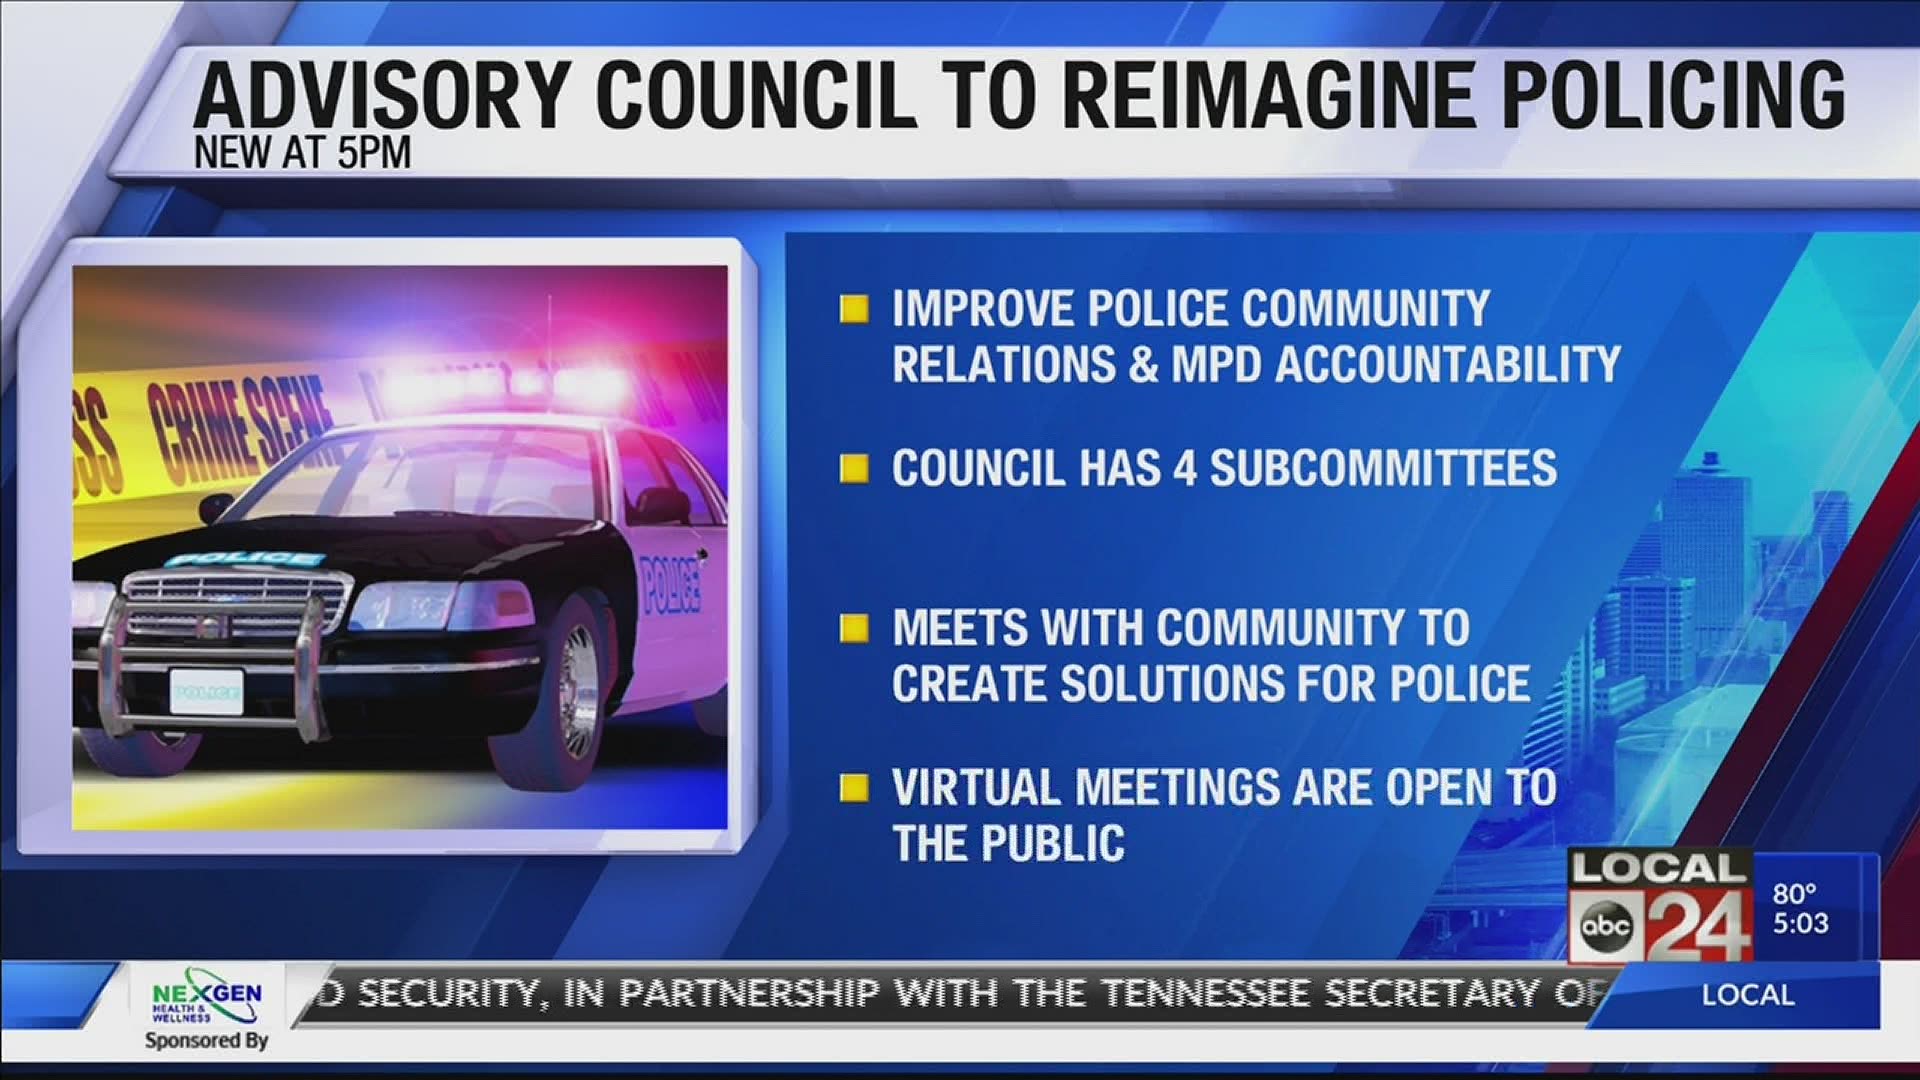 This is part of an ongoing plan to improve community relations with law enforcement.